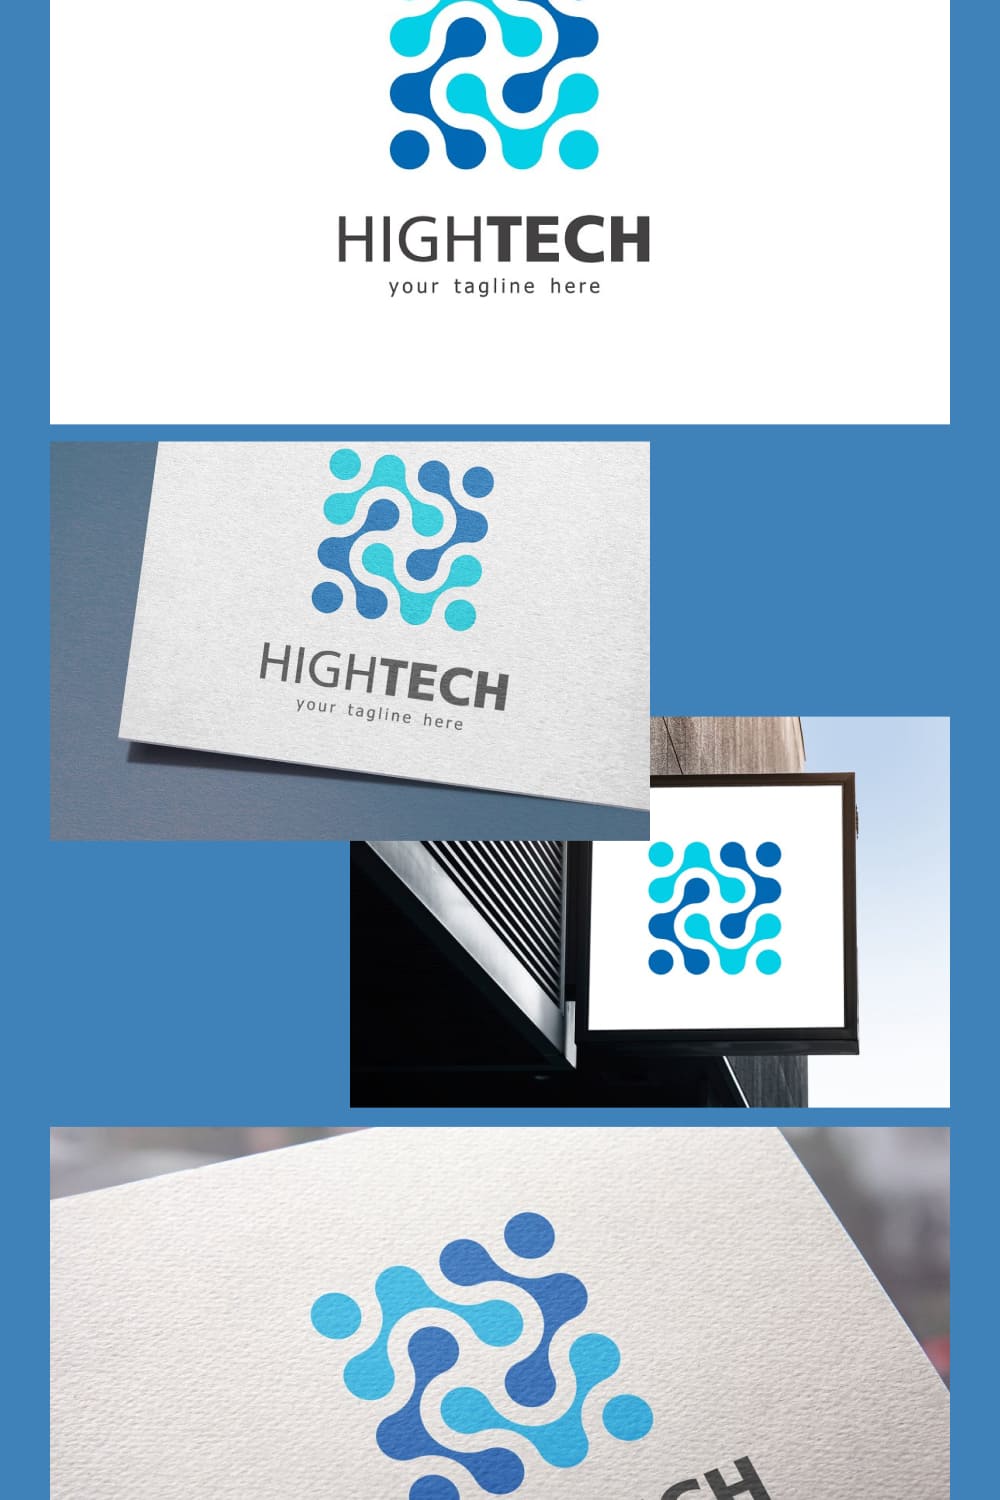 Modern tech logo template for your business.